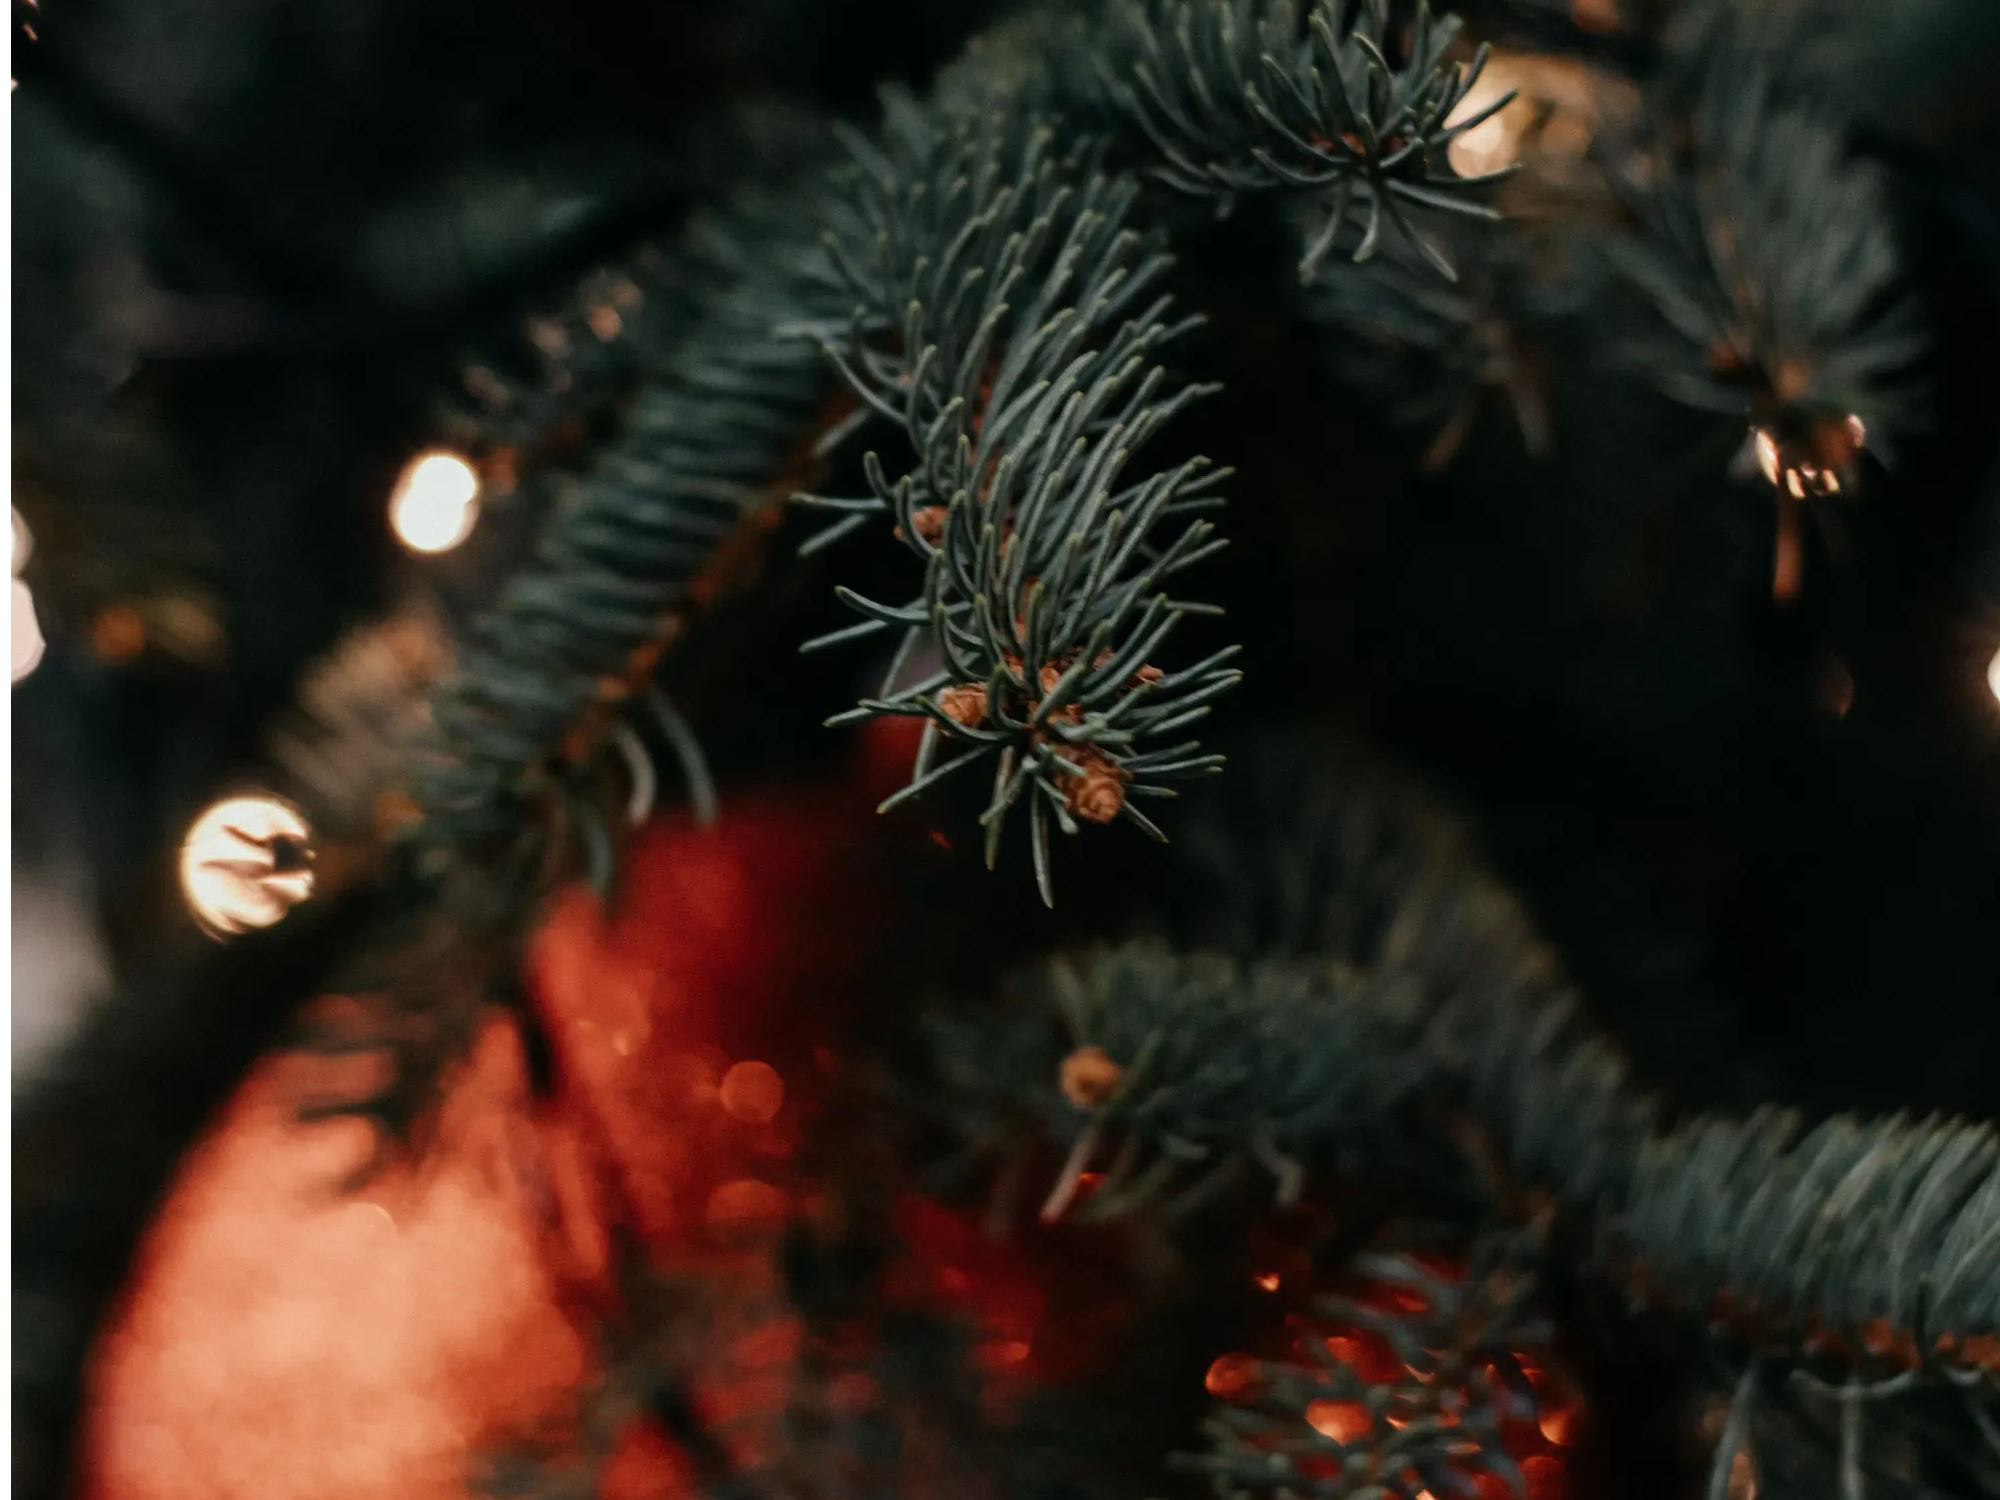 Close-up of an ornament on a Christmas tree